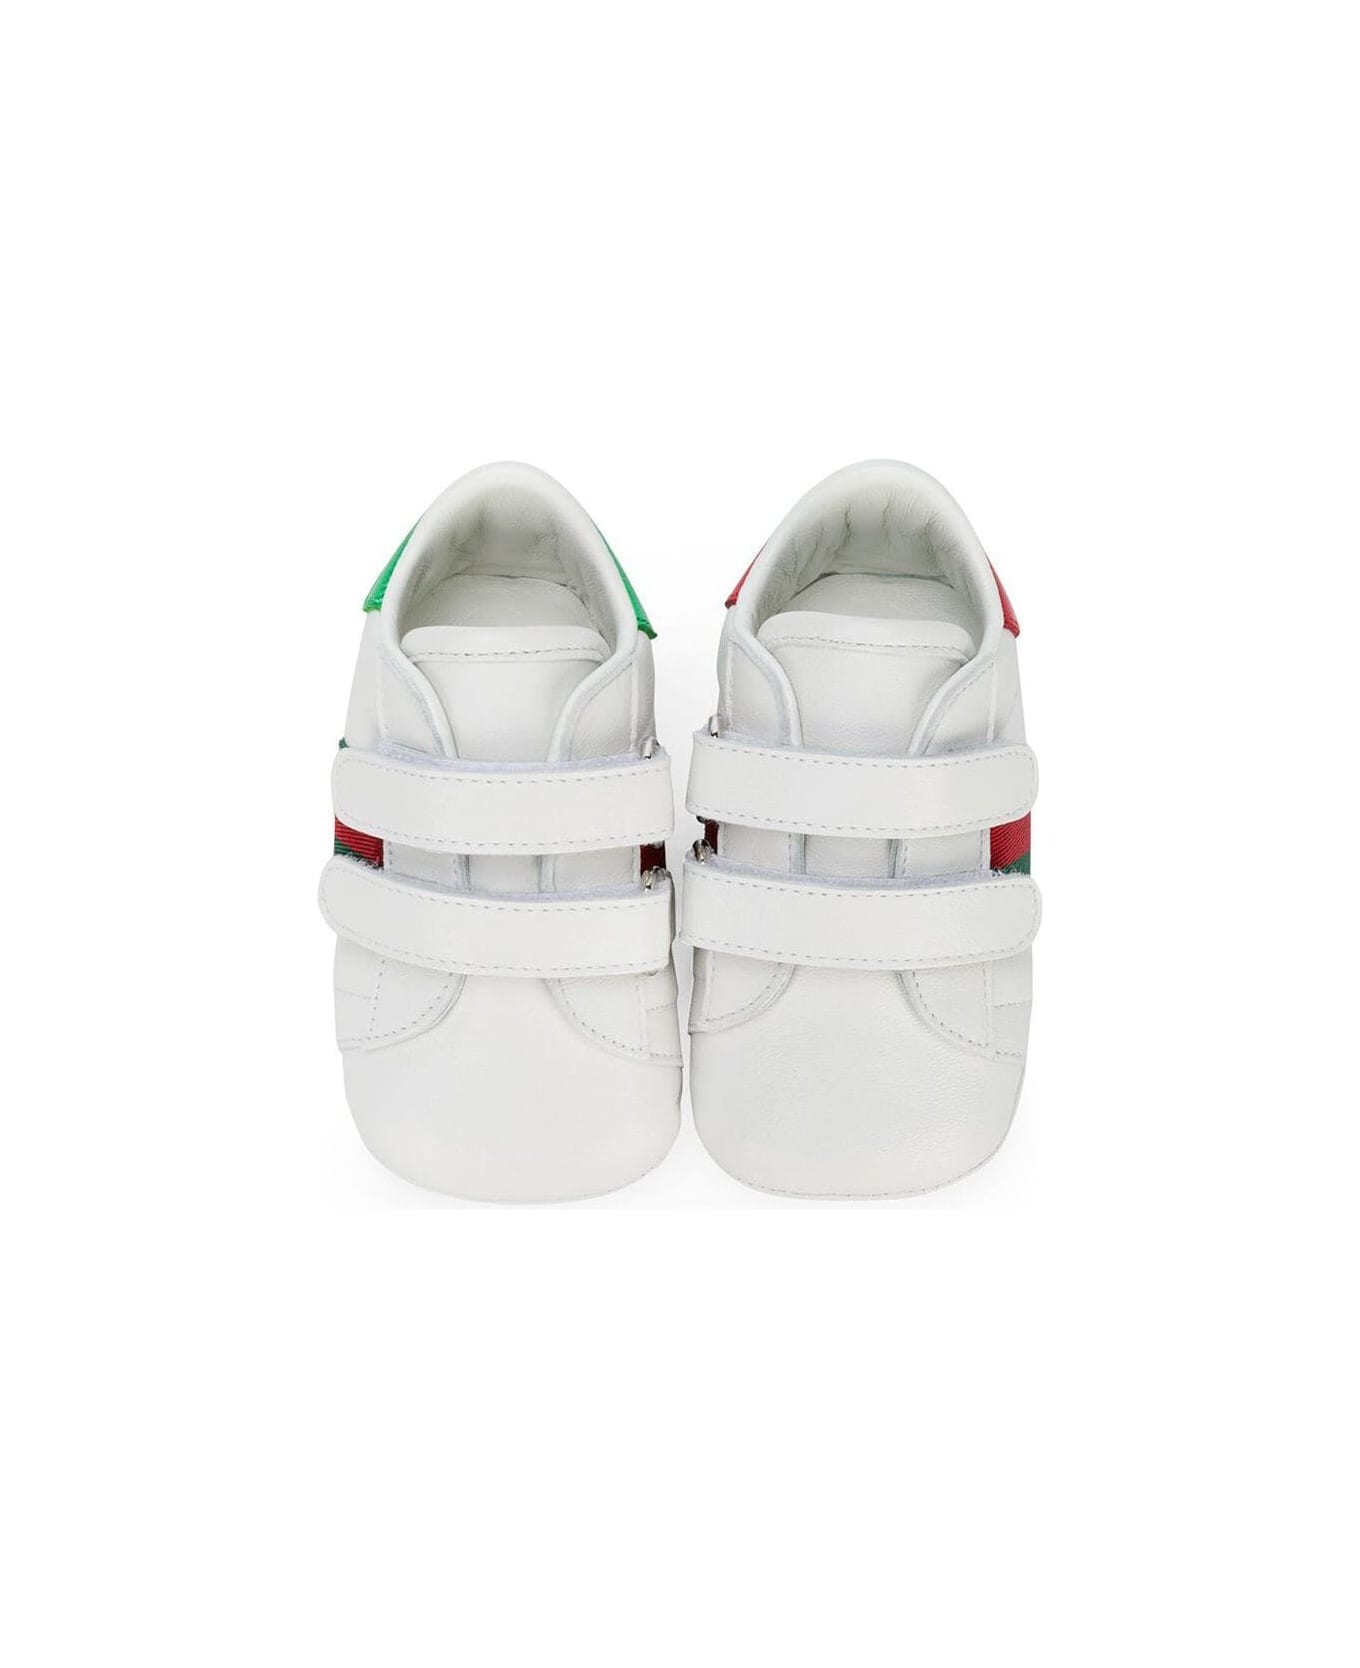 Gucci Sneaker Leather - black hiking sandals are a great choice